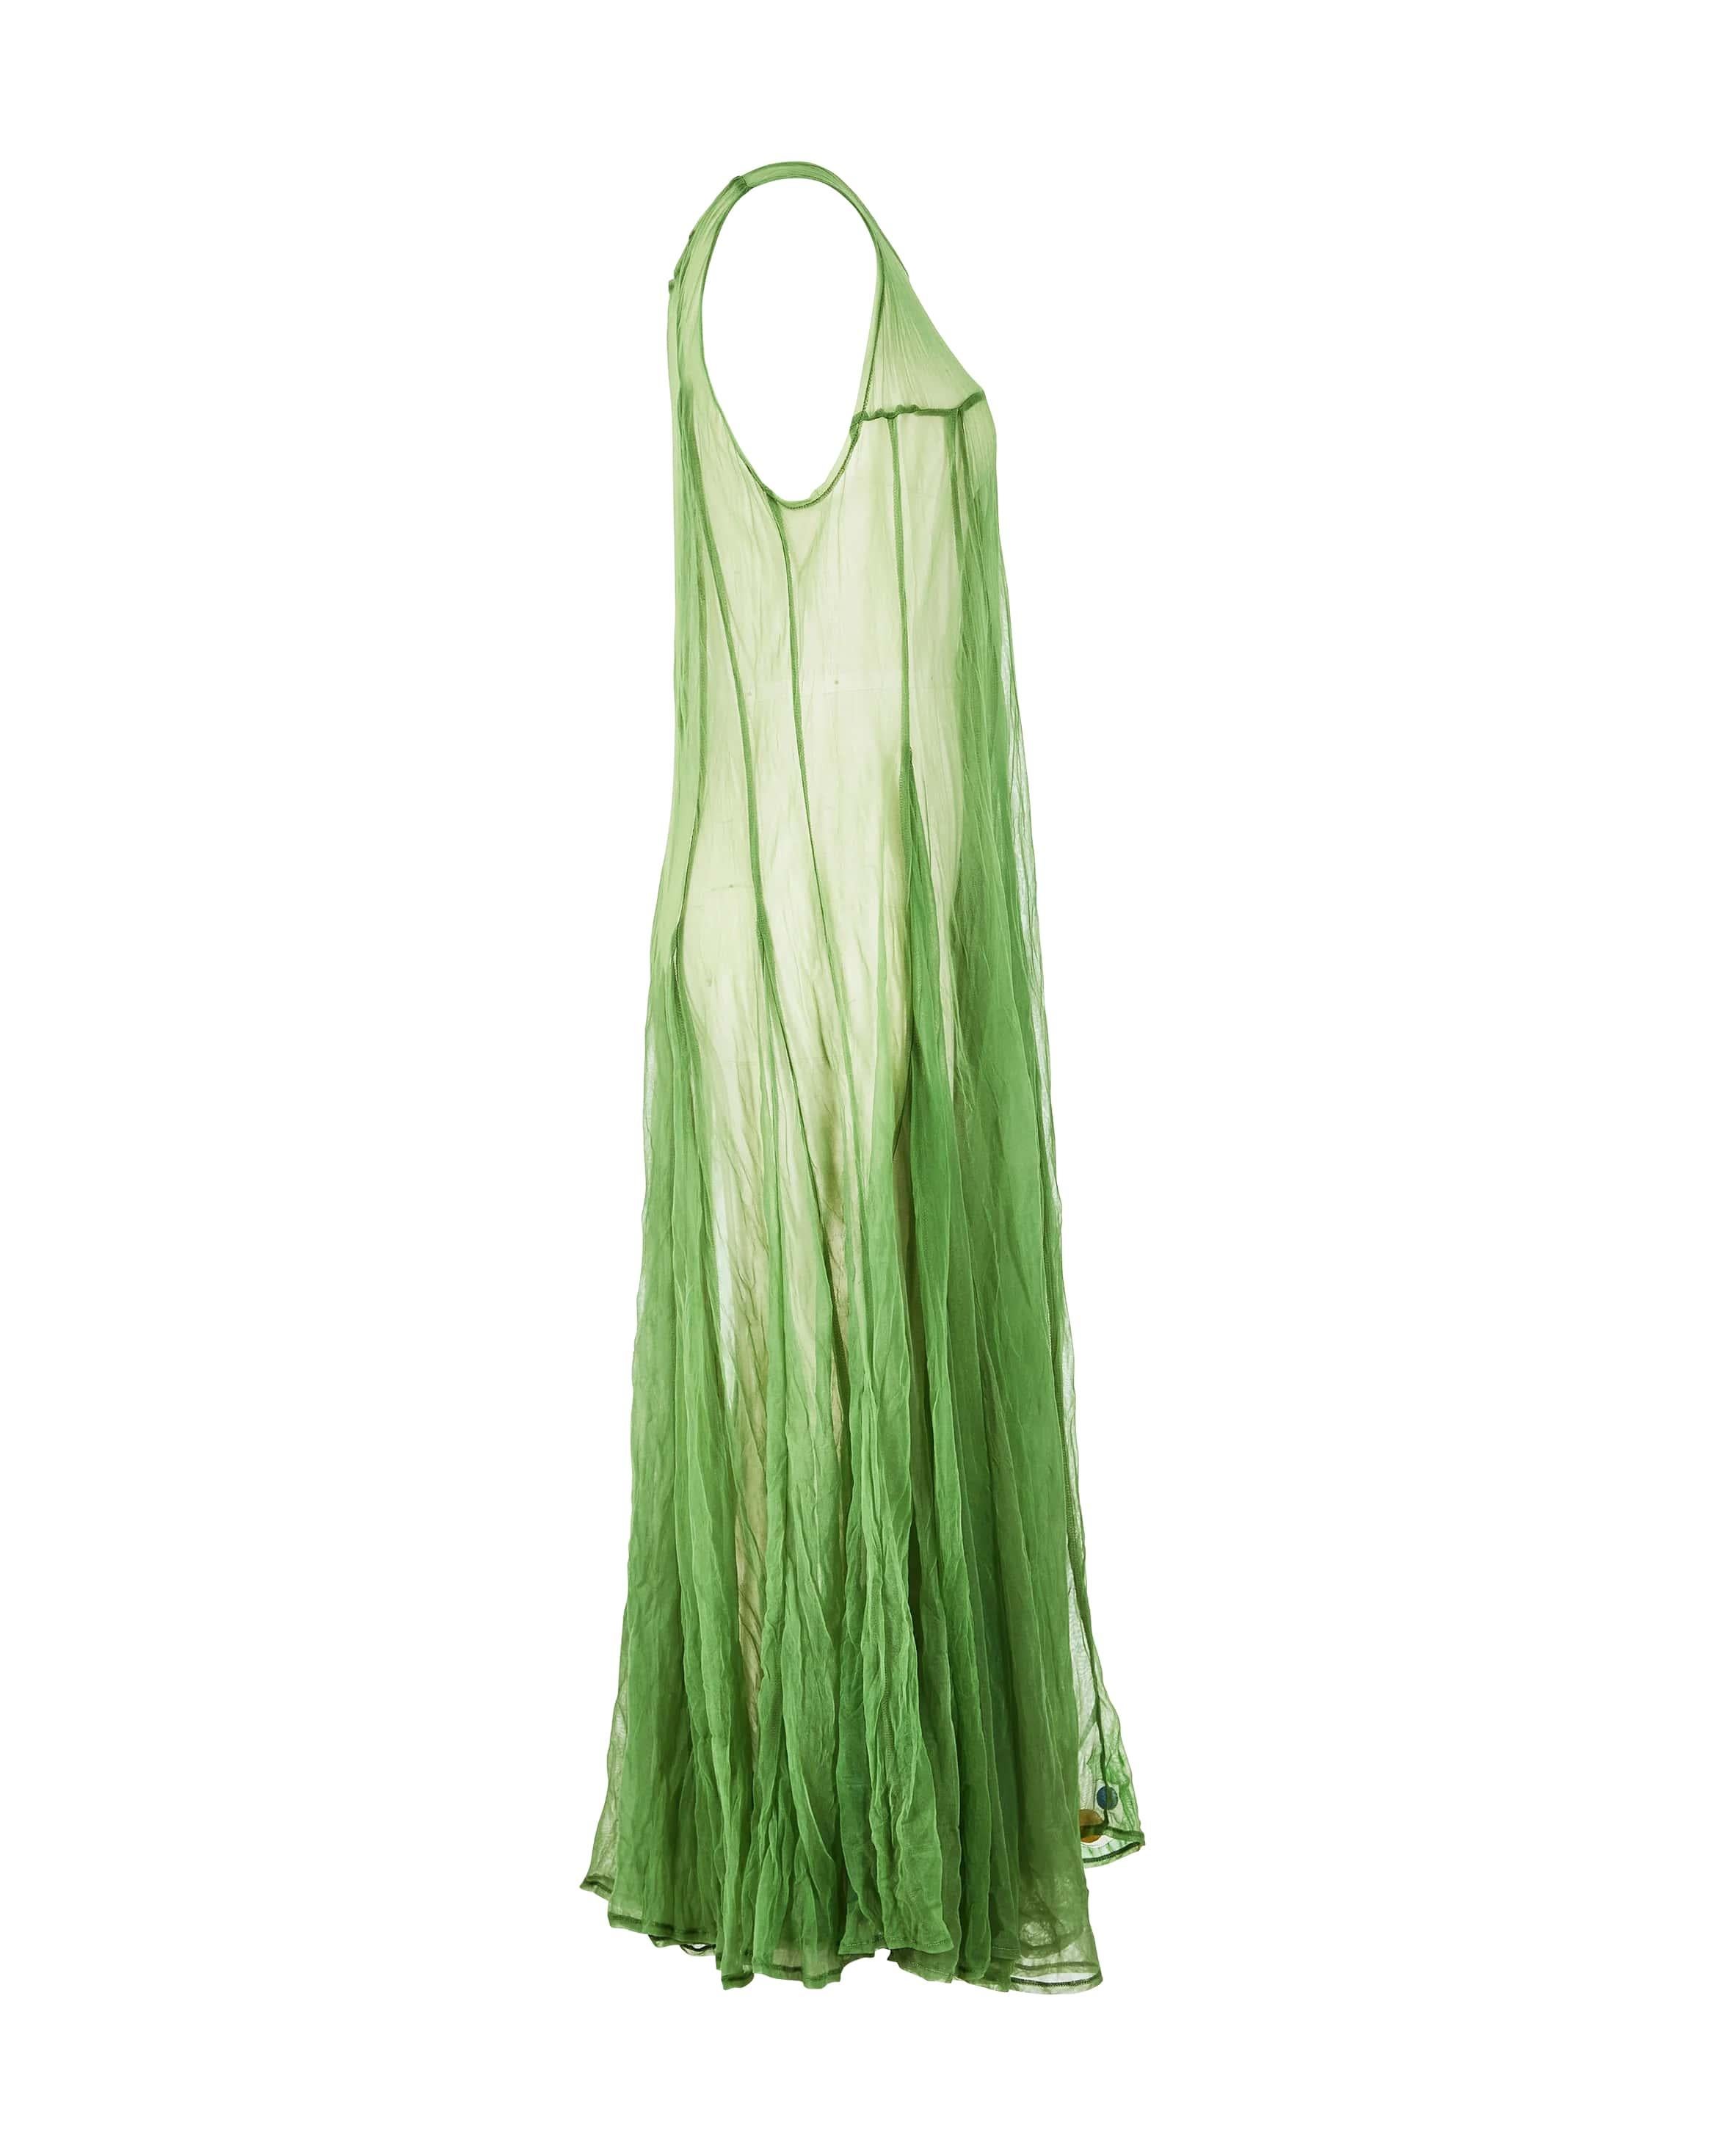 S/S 1997 Yohji Yamamoto moss green sheer mesh maxi dress. A-line full mesh dress with scoop neck, full skirt, and asymmetrical paneling throughout. Colorful geometric print detail at hem. Similar featured on runway. 
